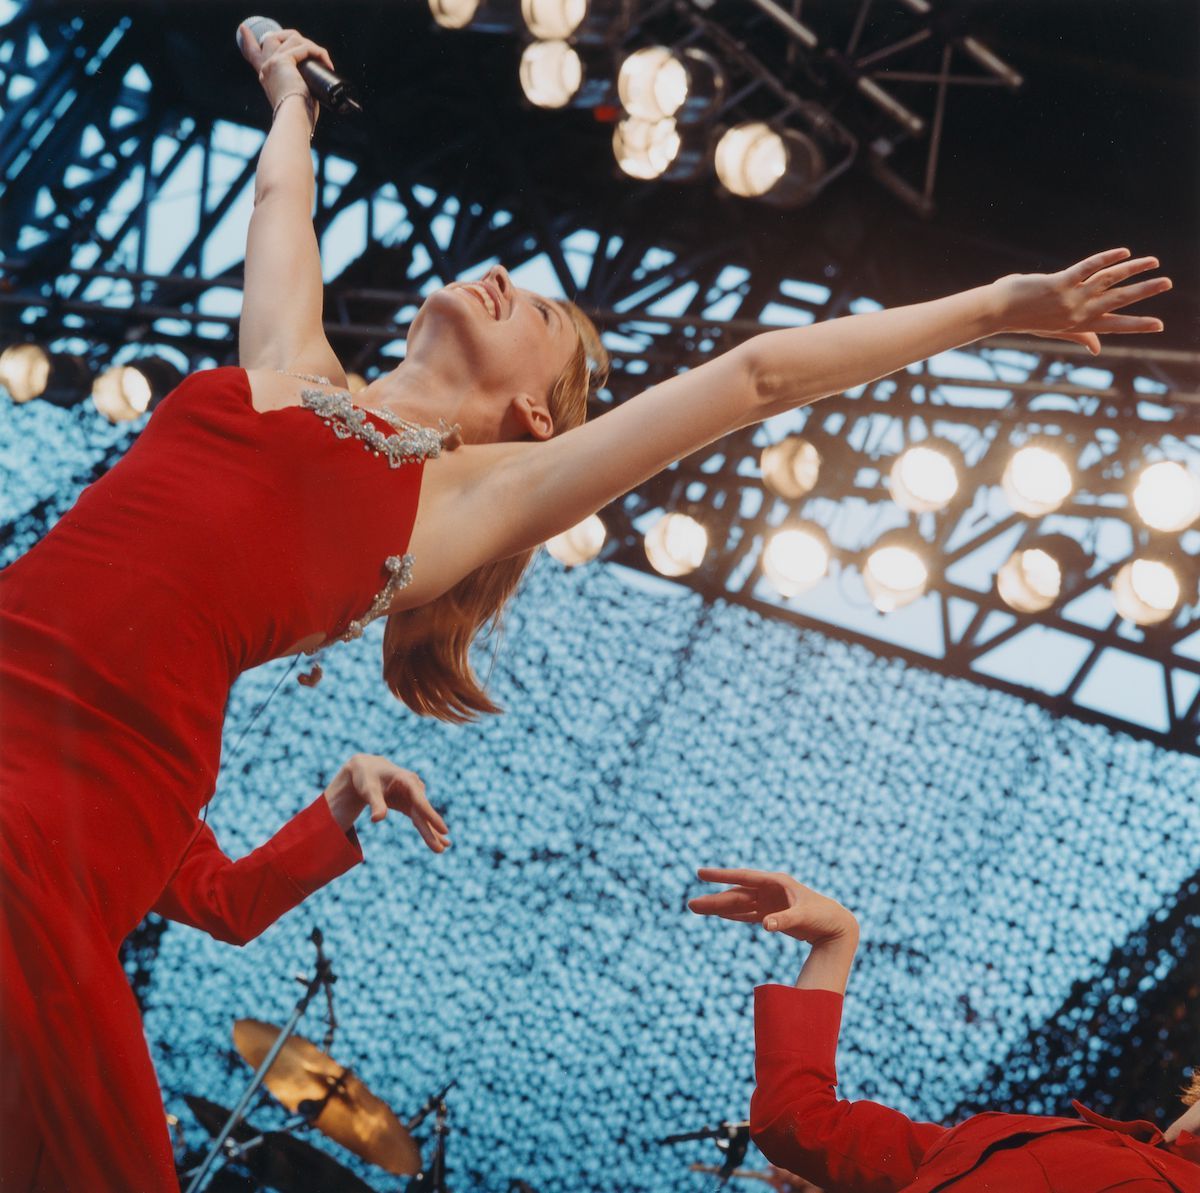 Untitled#15 (Kylie Minogue performs at Tour of Duty concert at Dili Stadium, East Timor, 21 December 1999)